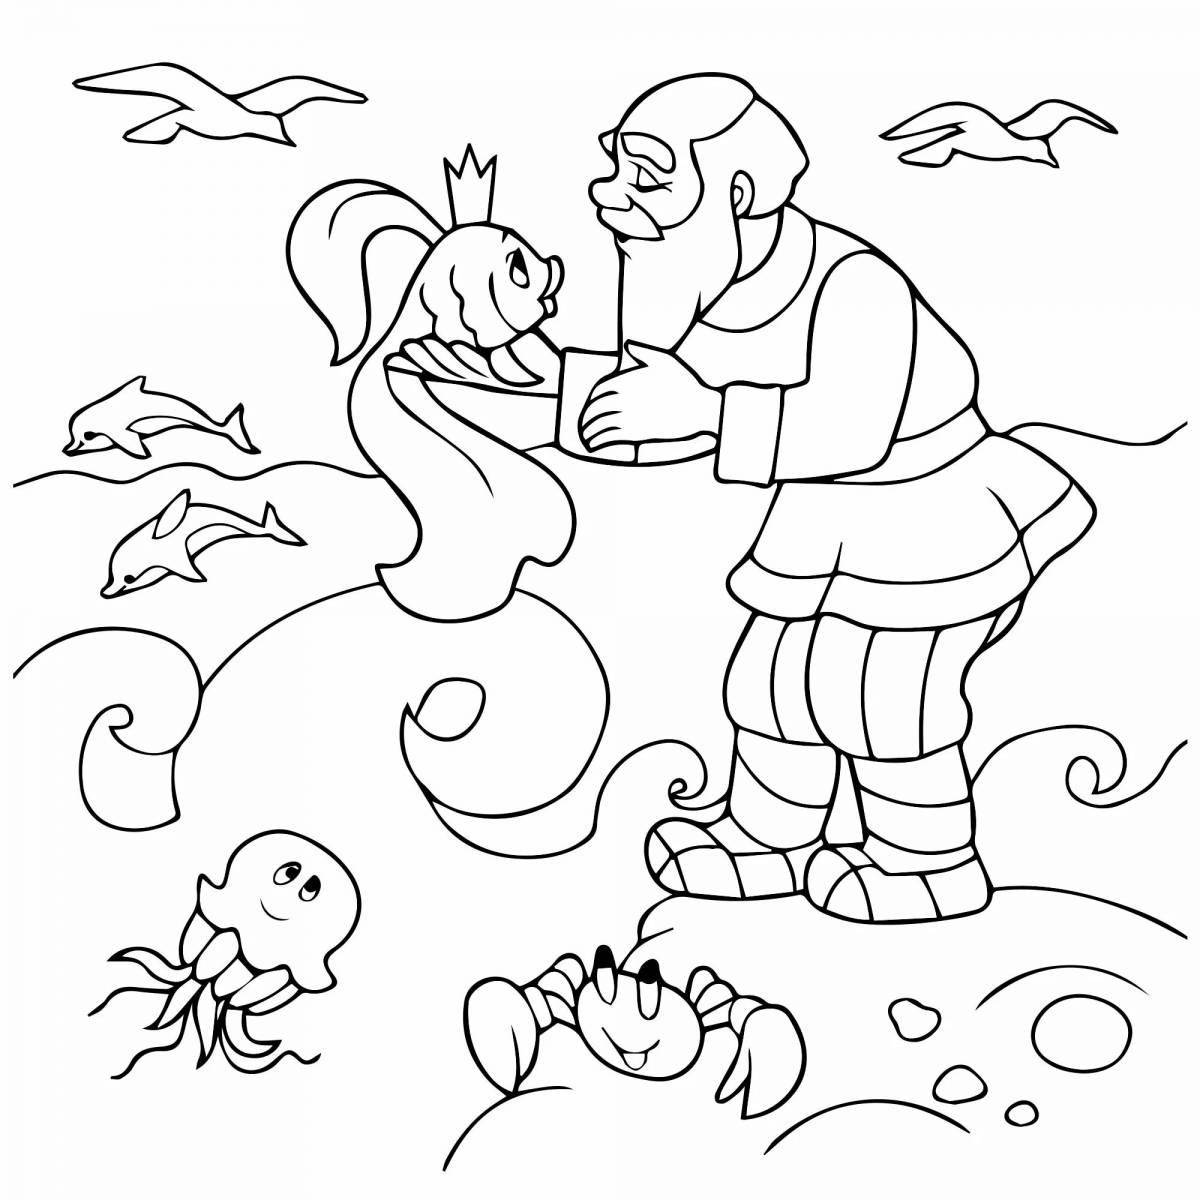 Coloring book Pushkin's magnificent fairy tale